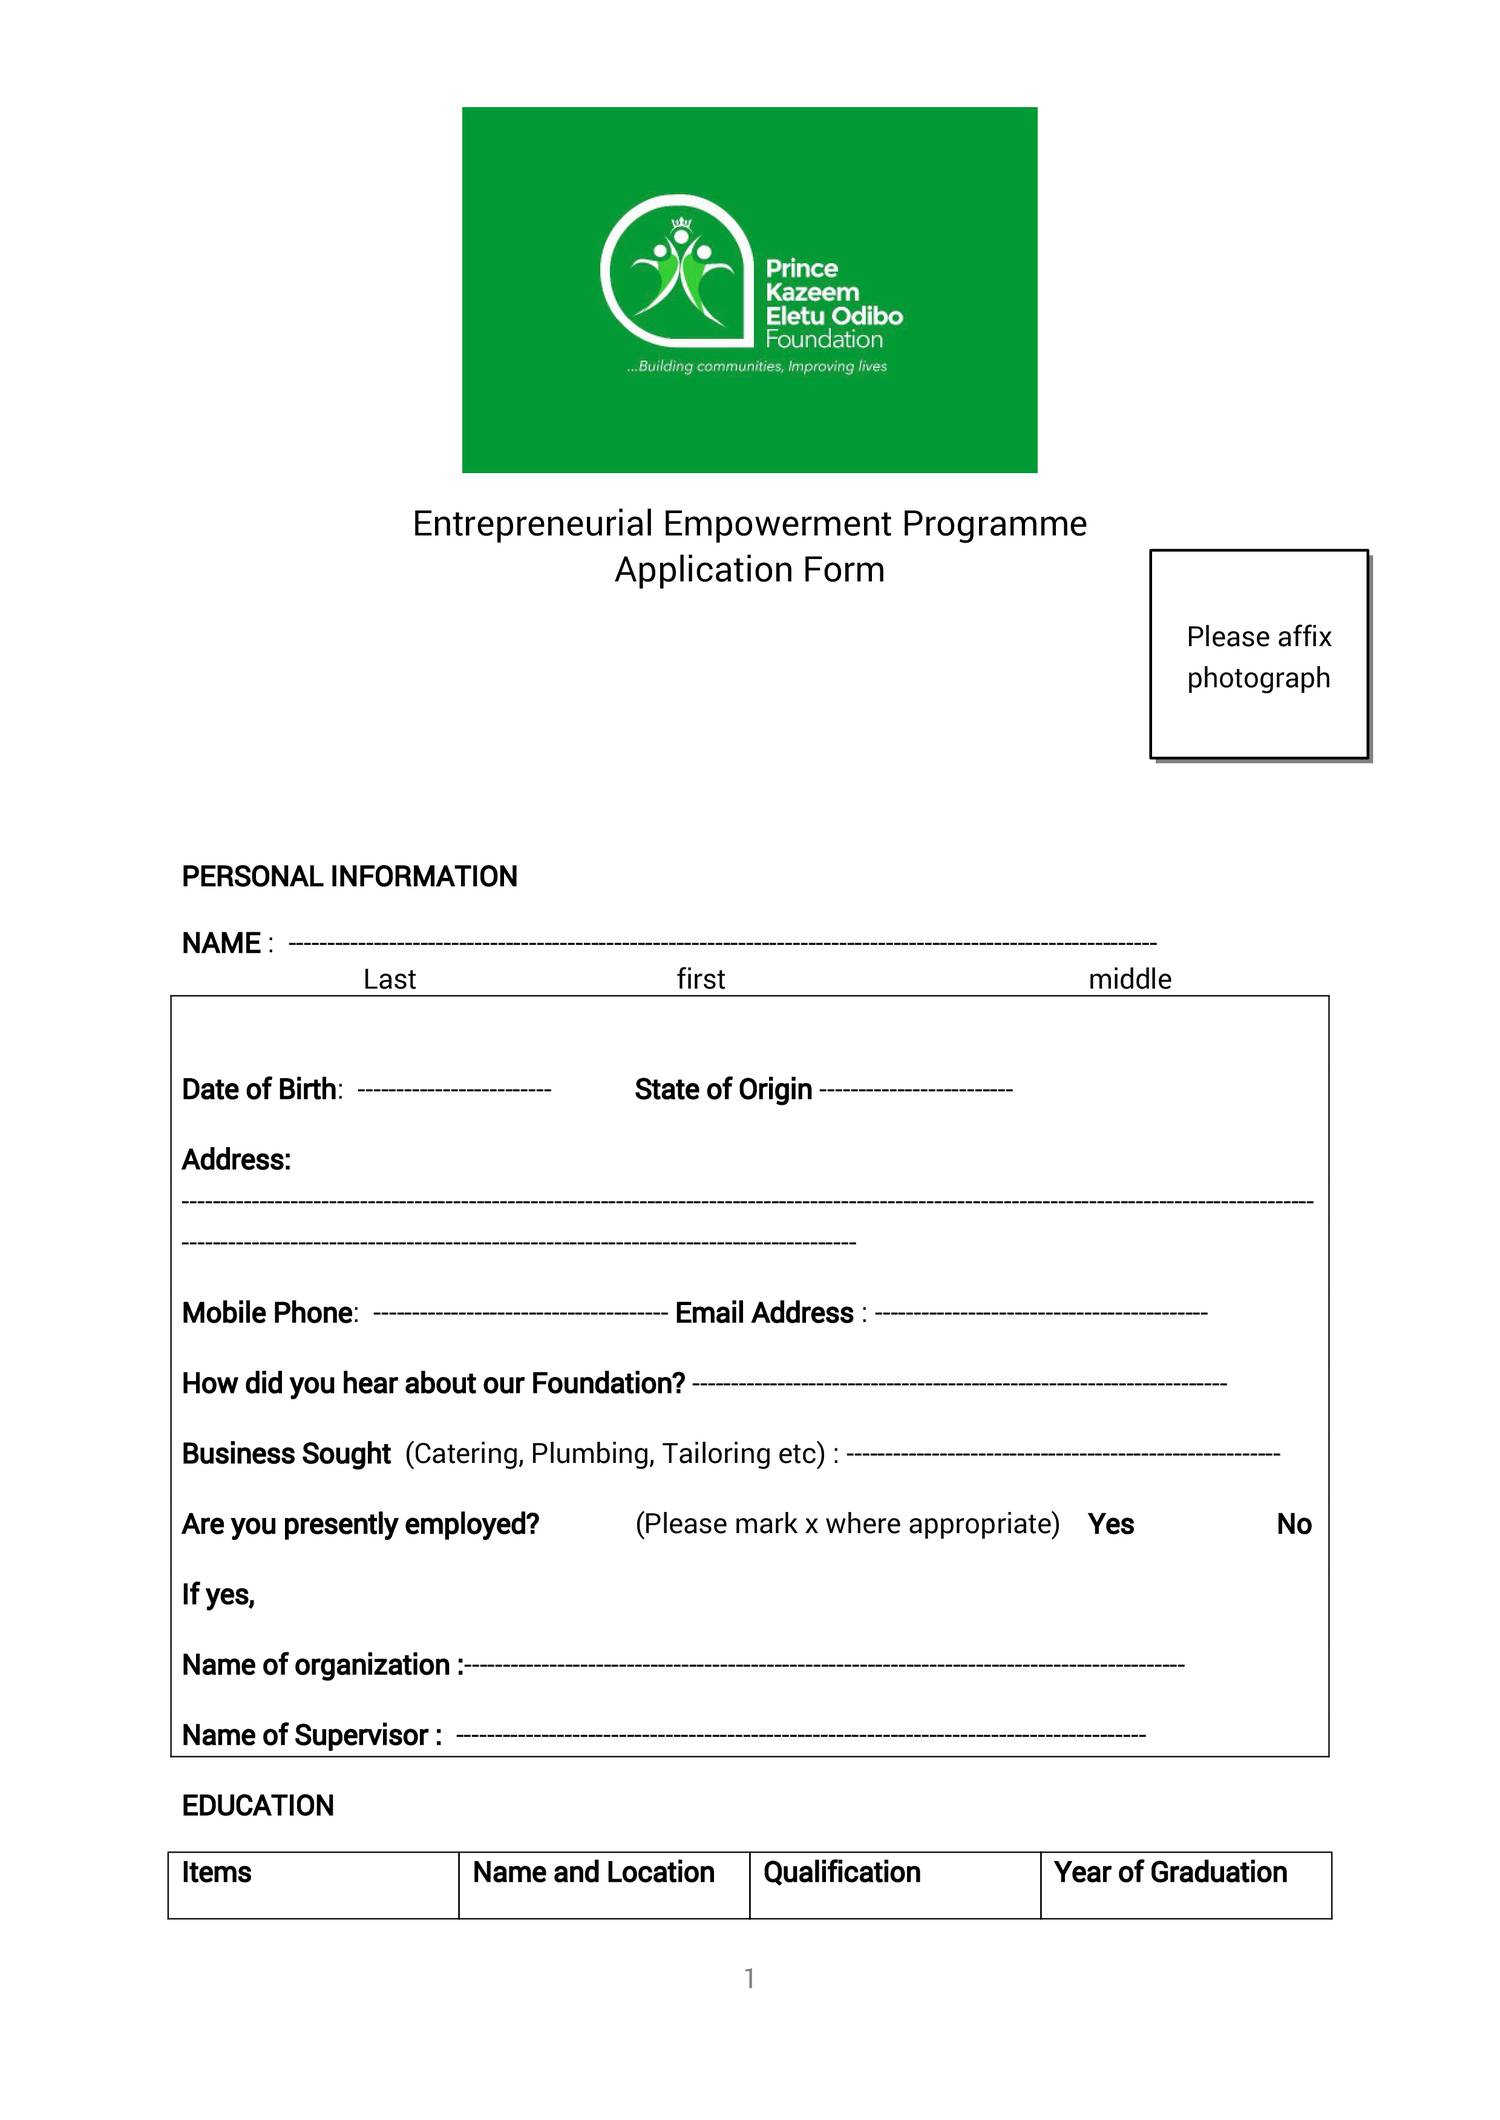 2010-ph-eteeap-application-form-fill-online-printable-fillable-blank